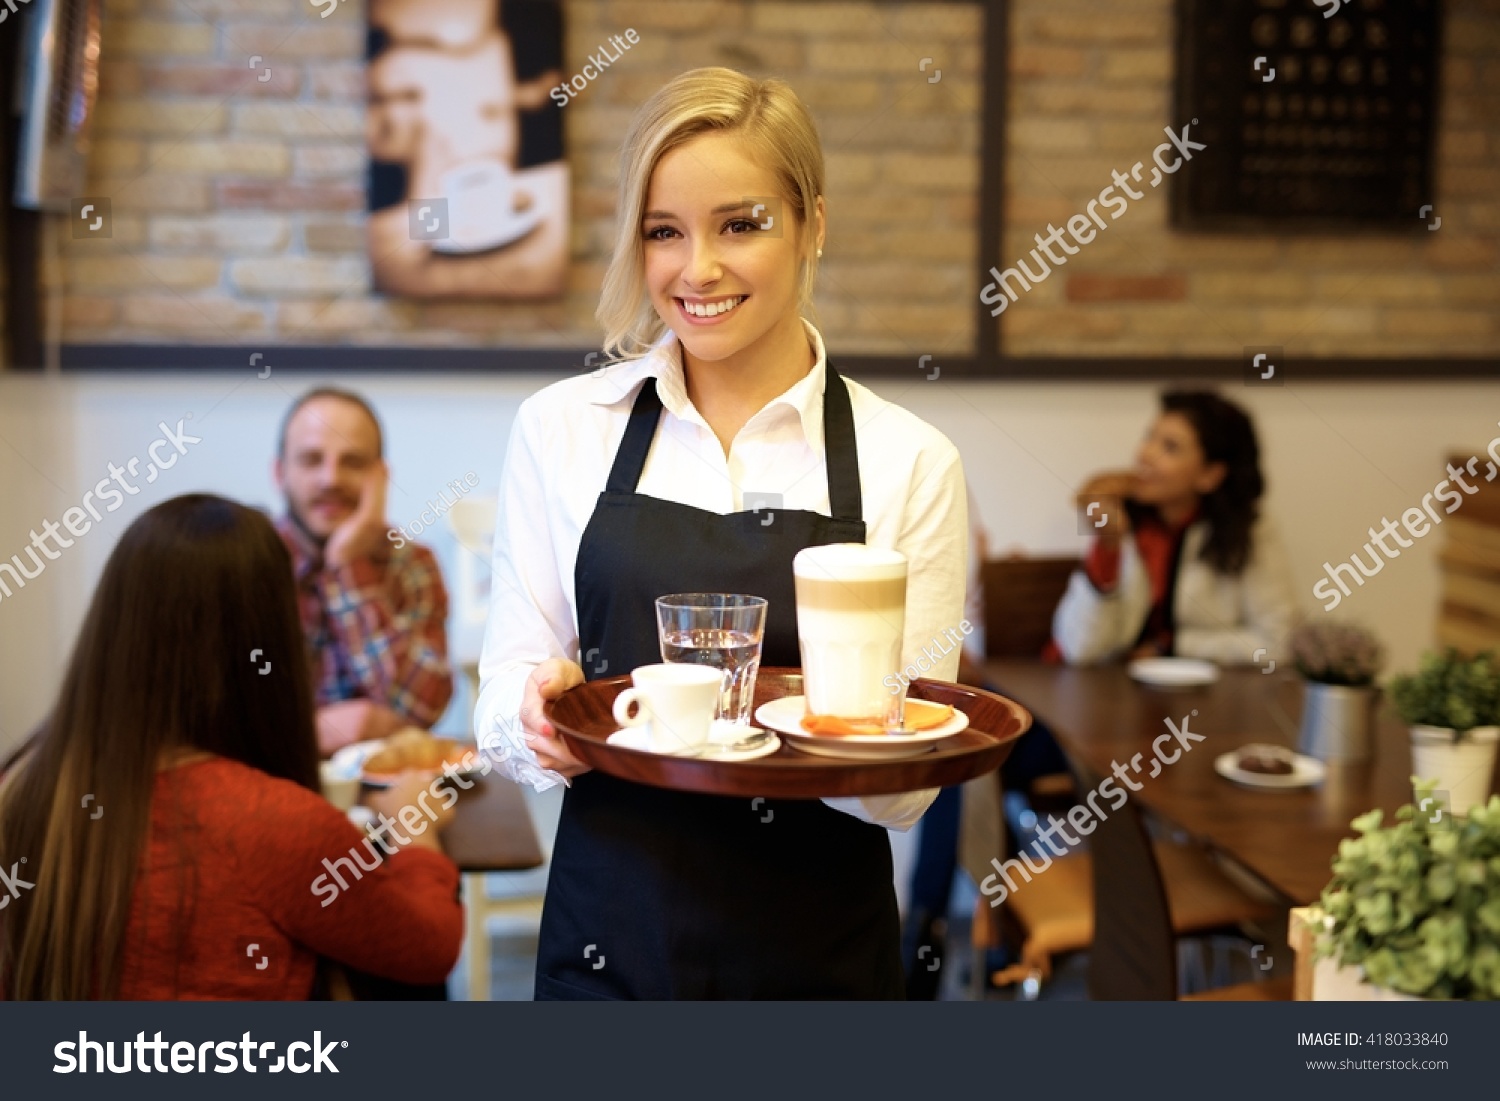 awful example of stock photos for a restaurant